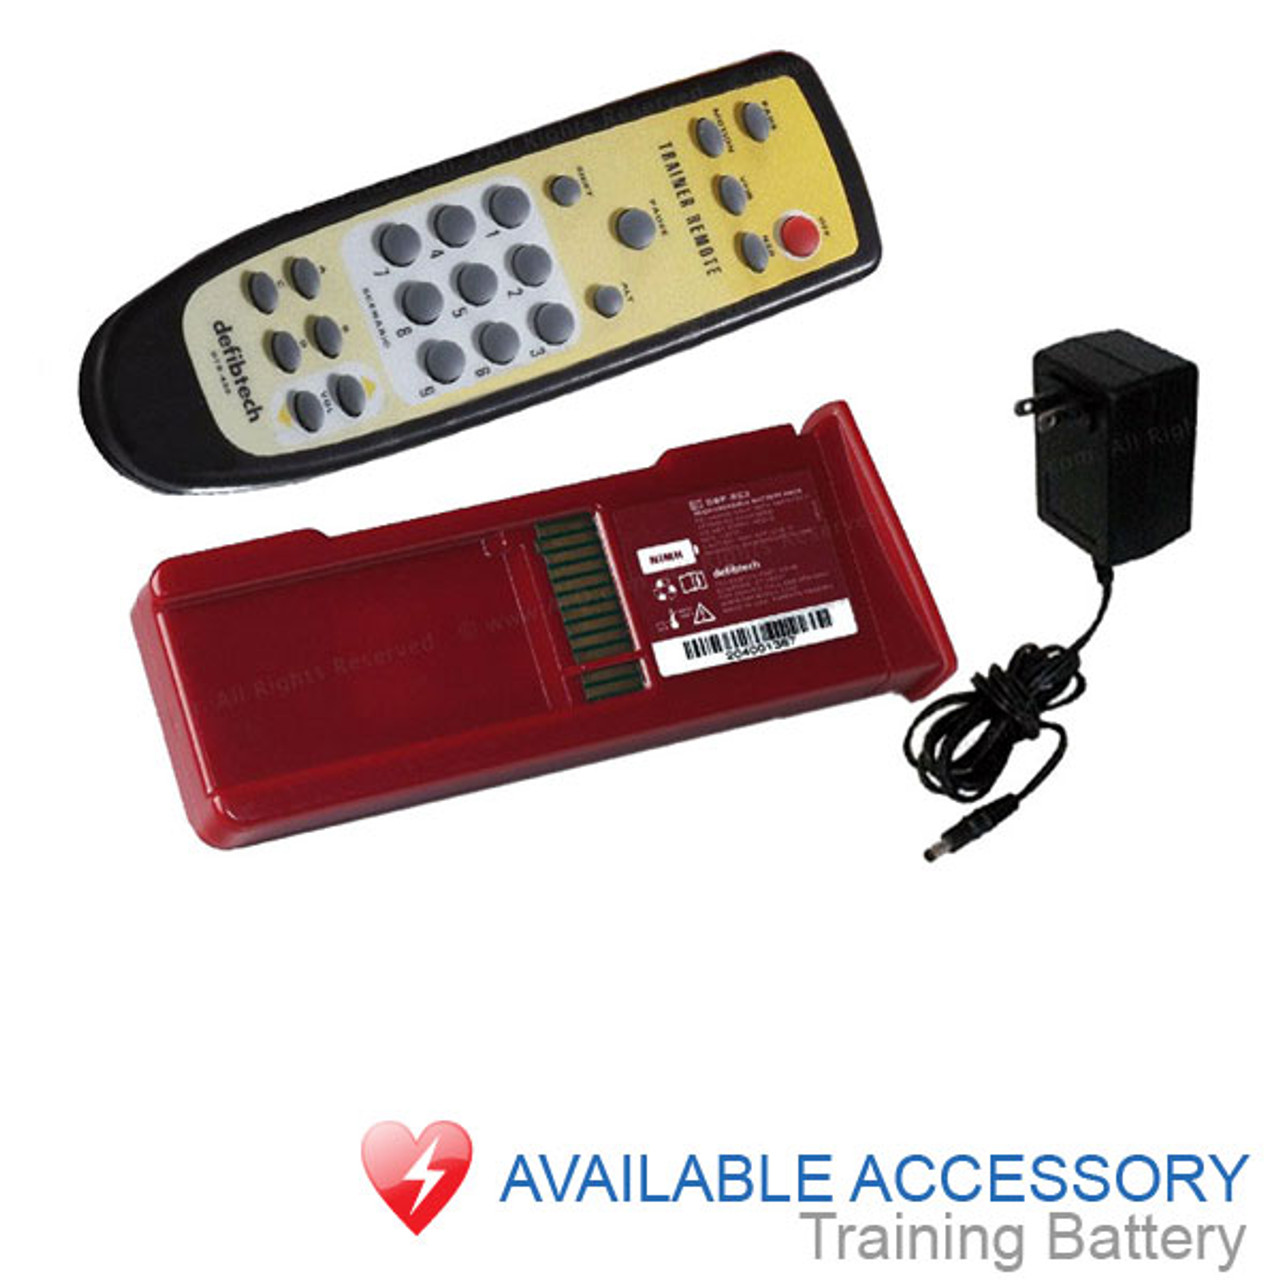 Defibtech Lifeline Trainer Battery and Remote